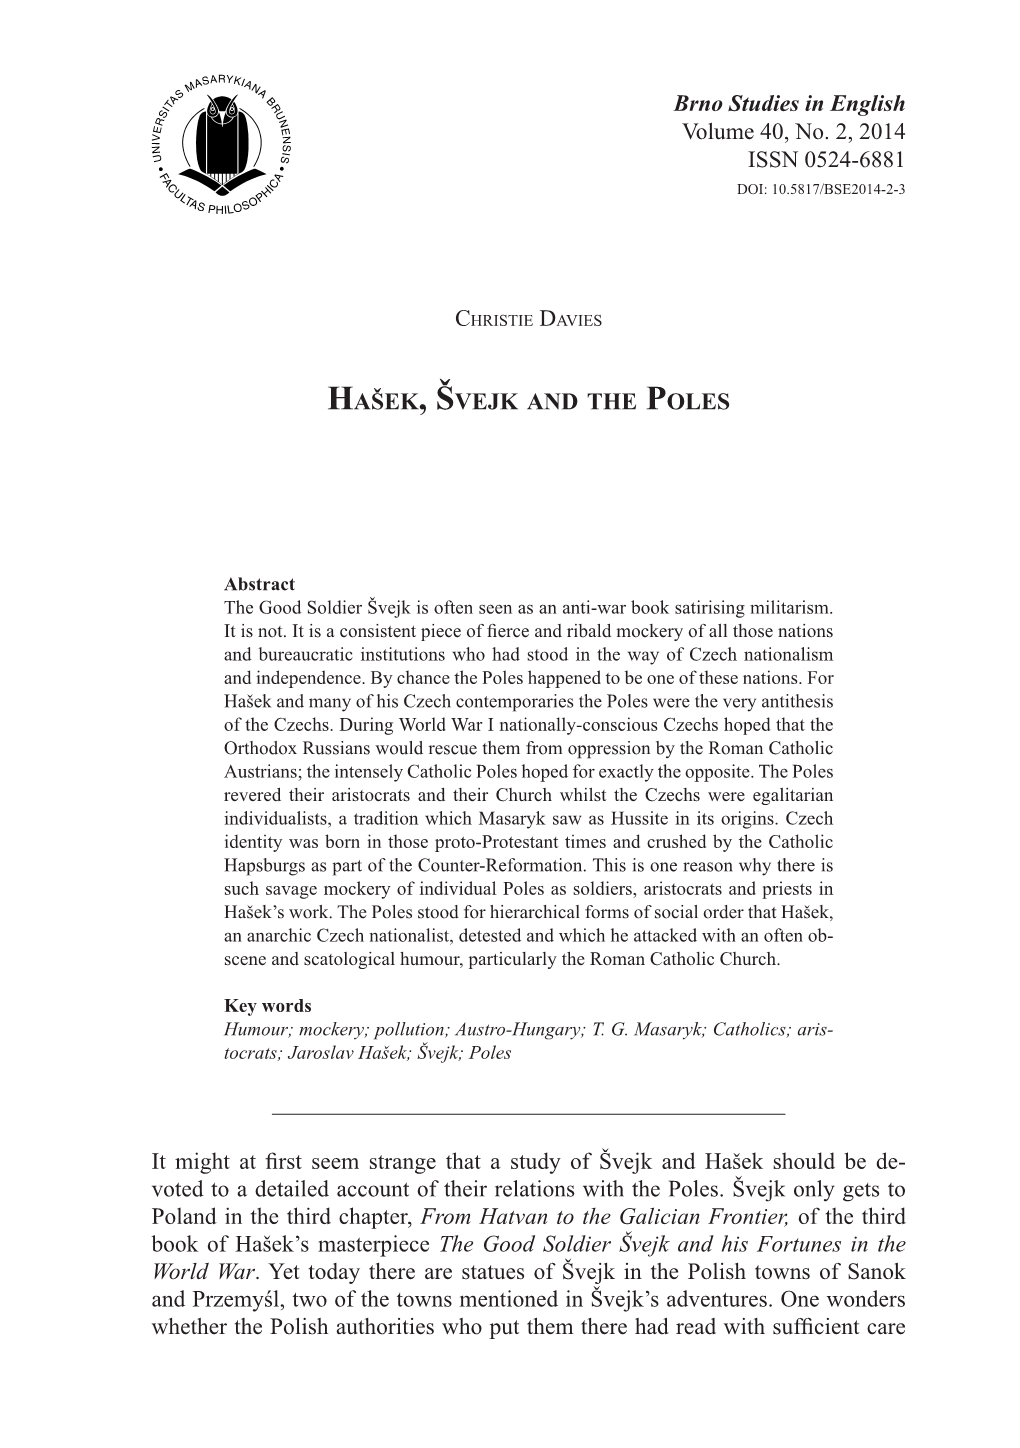 Brno Studies in English Volume 40, No. 2, 2014 ISSN 0524-6881 HAŠEK, ŠVEJK and the POLES It Might at First Seem Strange That